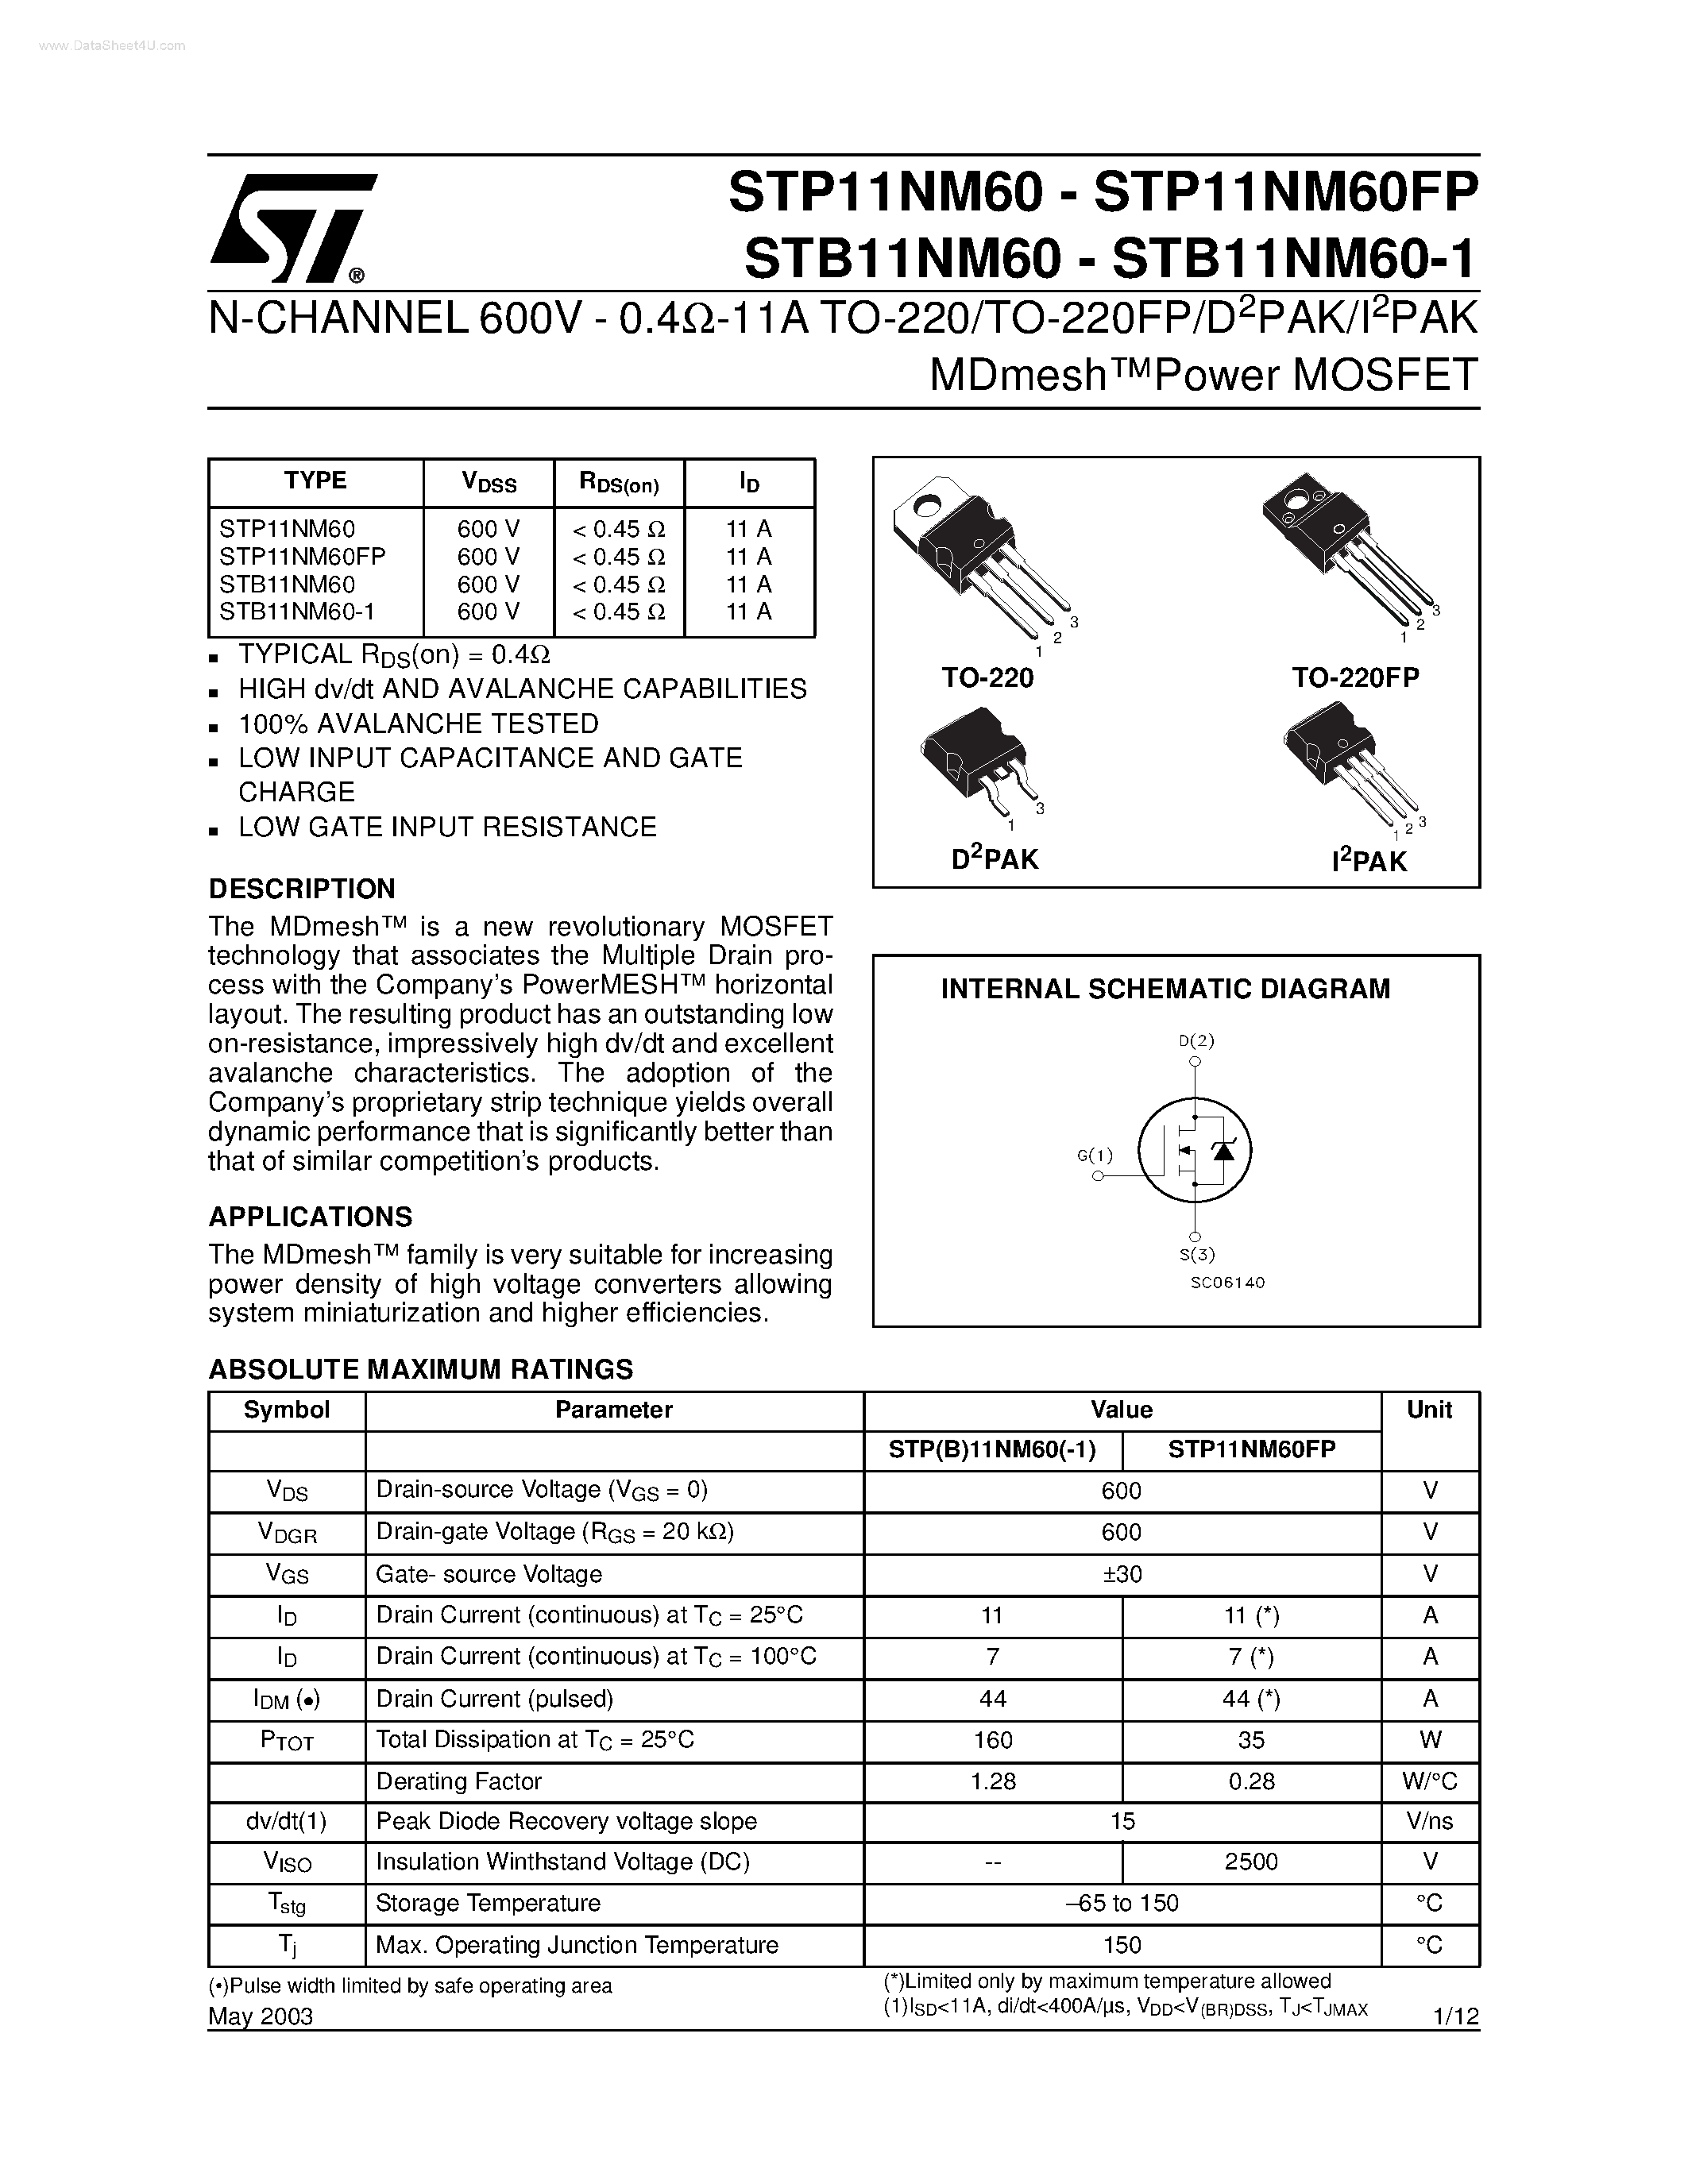 Даташит STP11NM60 - N-CHANNEL Power MOSFET страница 1